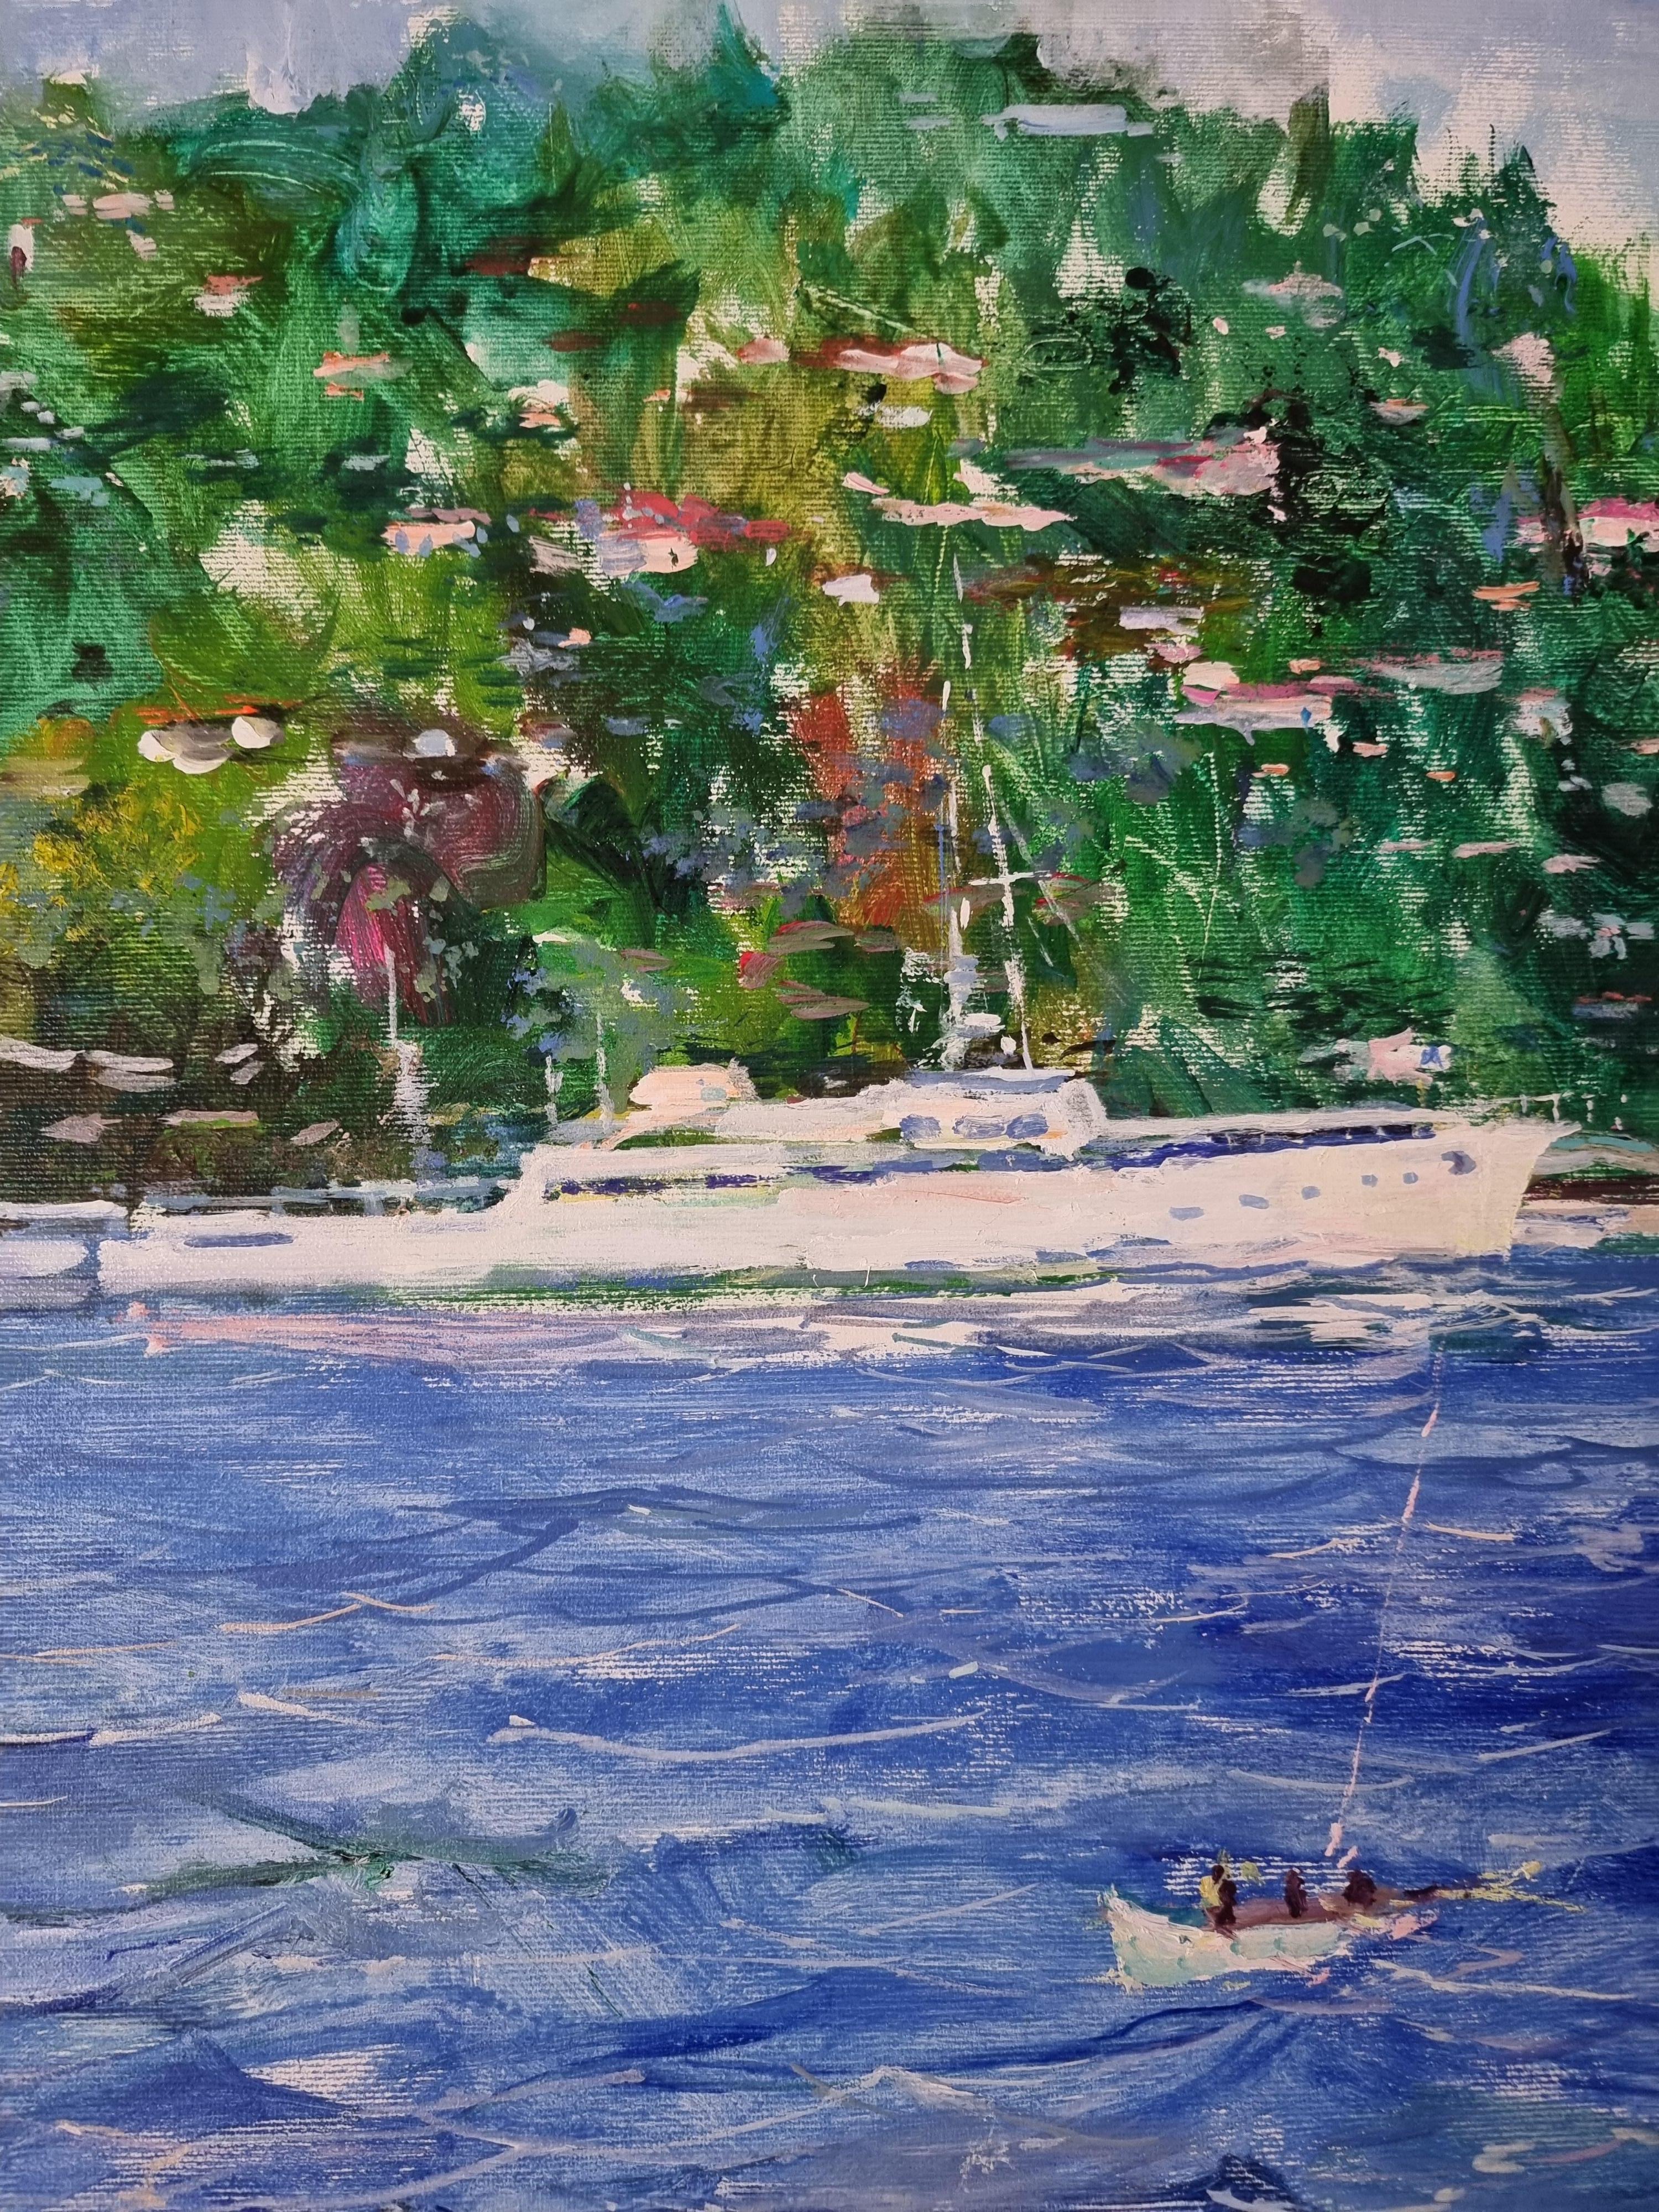  Scorpios Island Greece Christina Onassis Yacht - Landscape Painting For Sale 2